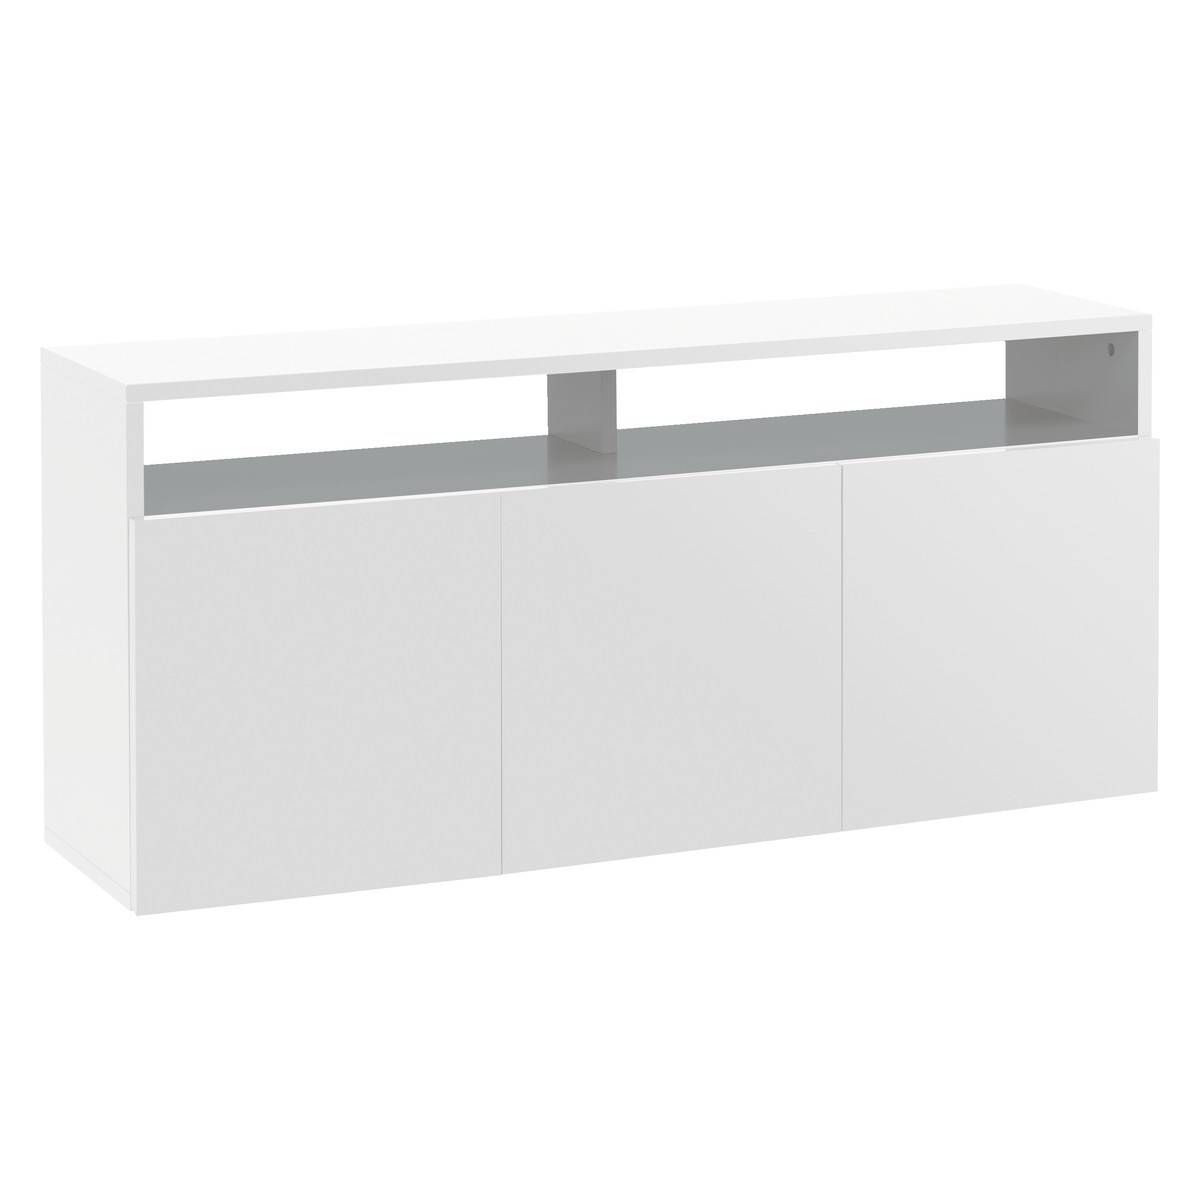 Kubrik White High Gloss Large Sideboard | Buy Now At Habitat Uk Intended For Large White Sideboards (View 3 of 30)